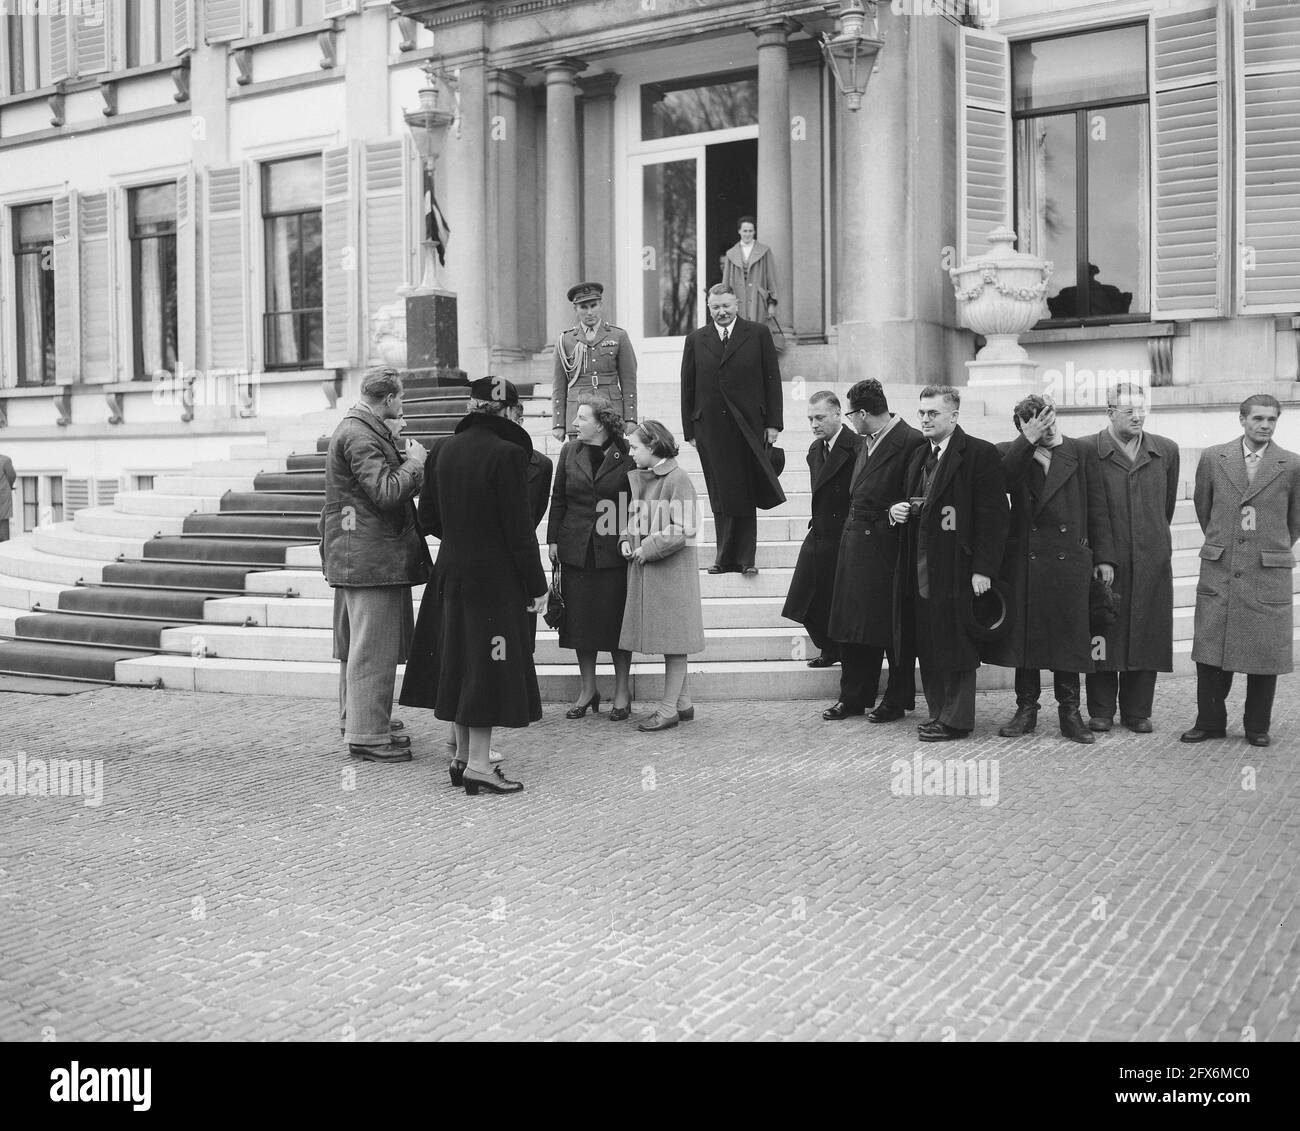 Hungarian refugees at the Queen's residence at Soestdijk, November 27, 1956, KINGIN, REFUGEES, The Netherlands, 20th century press agency photo, news to remember, documentary, historic photography 1945-1990, visual stories, human history of the Twentieth Century, capturing moments in time Stock Photo